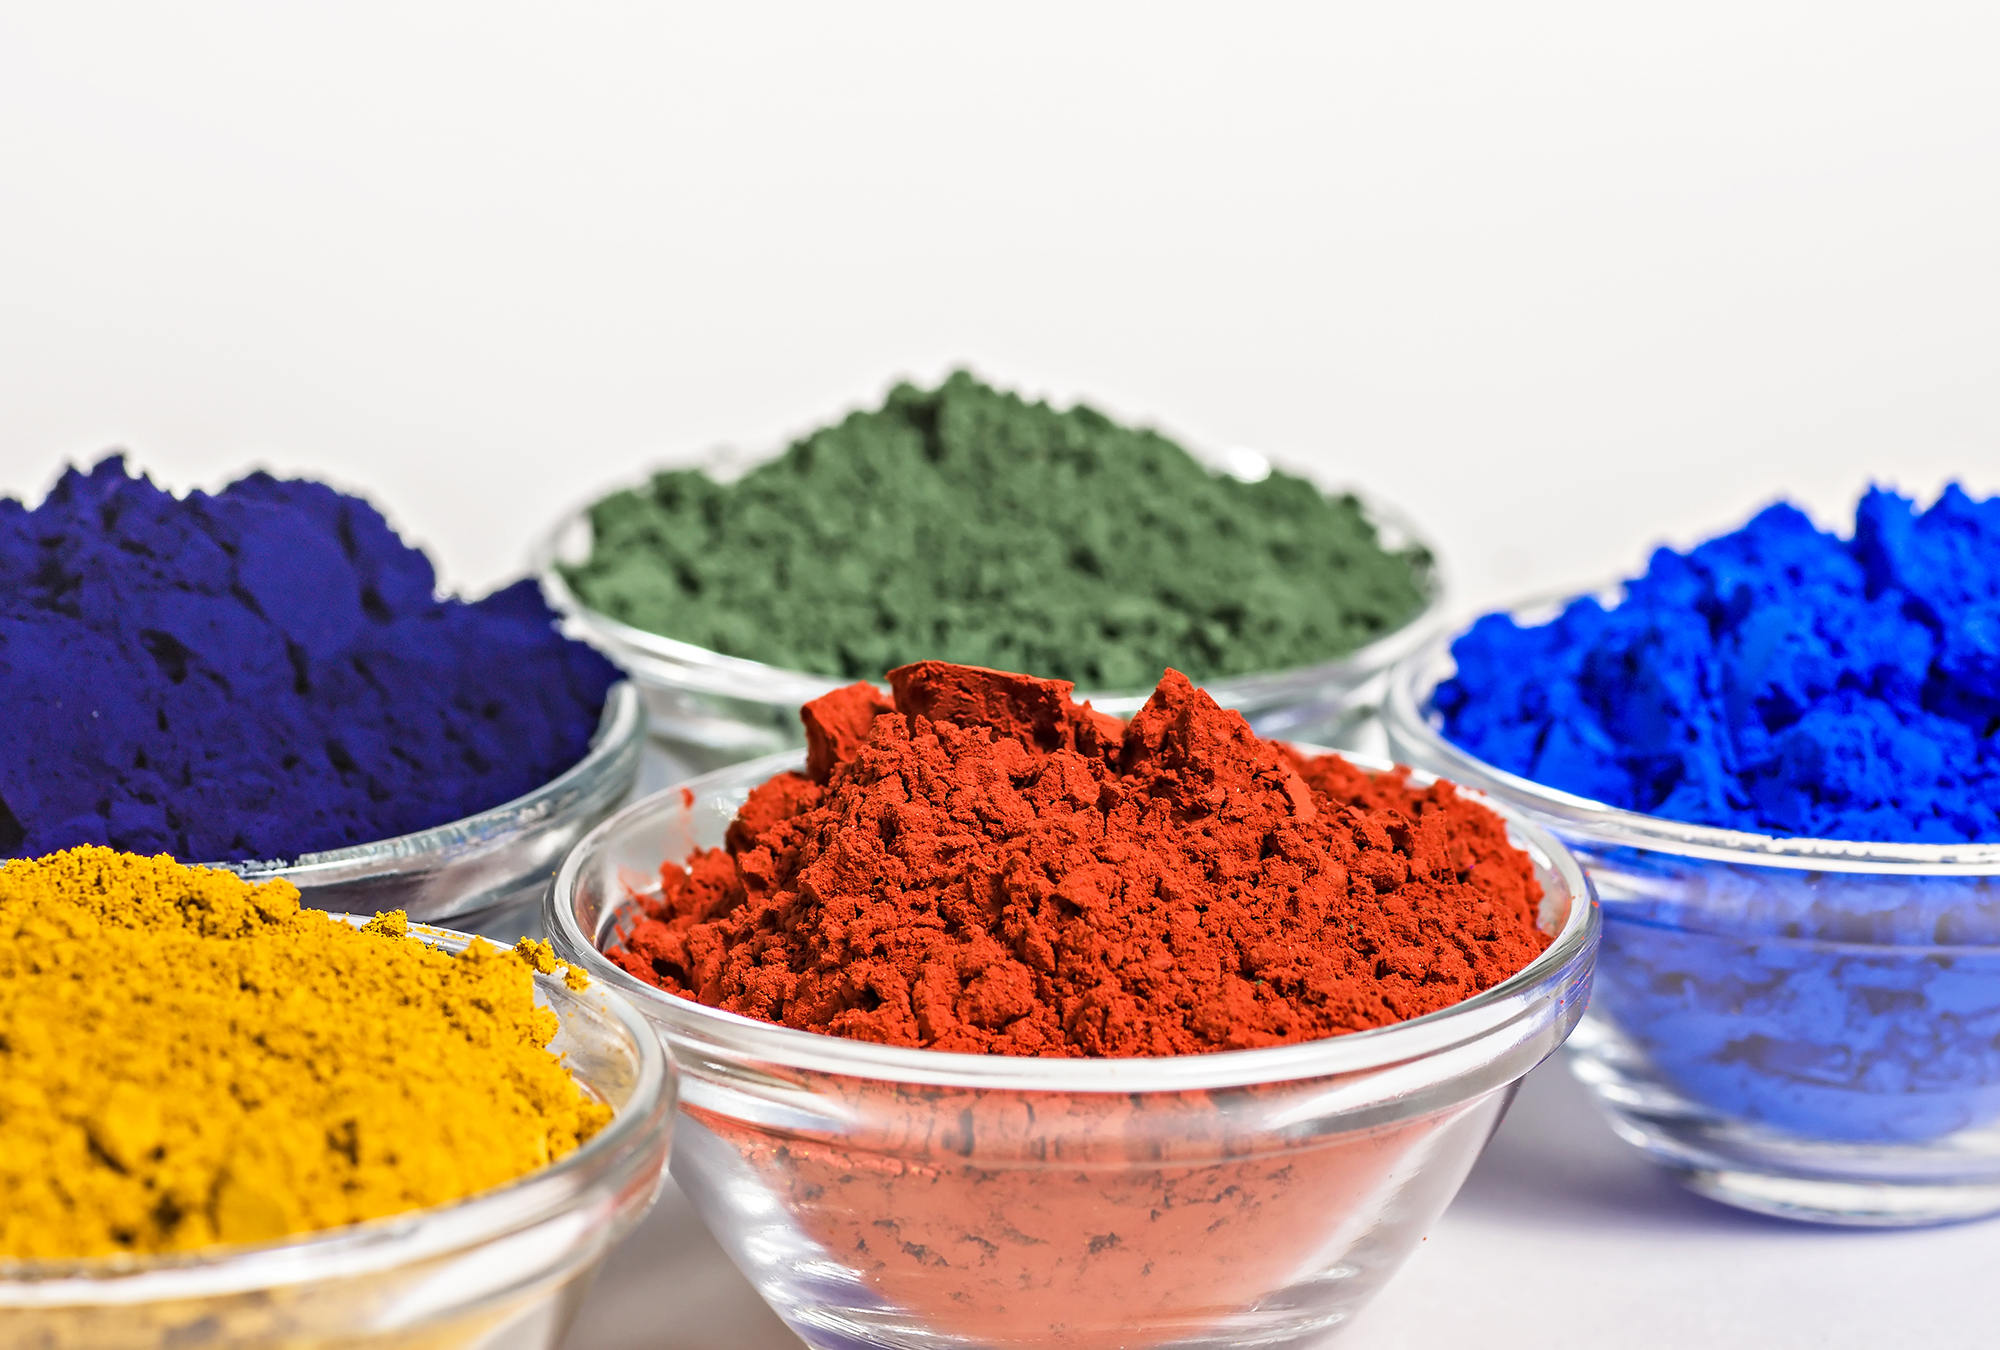 Grinding pigments